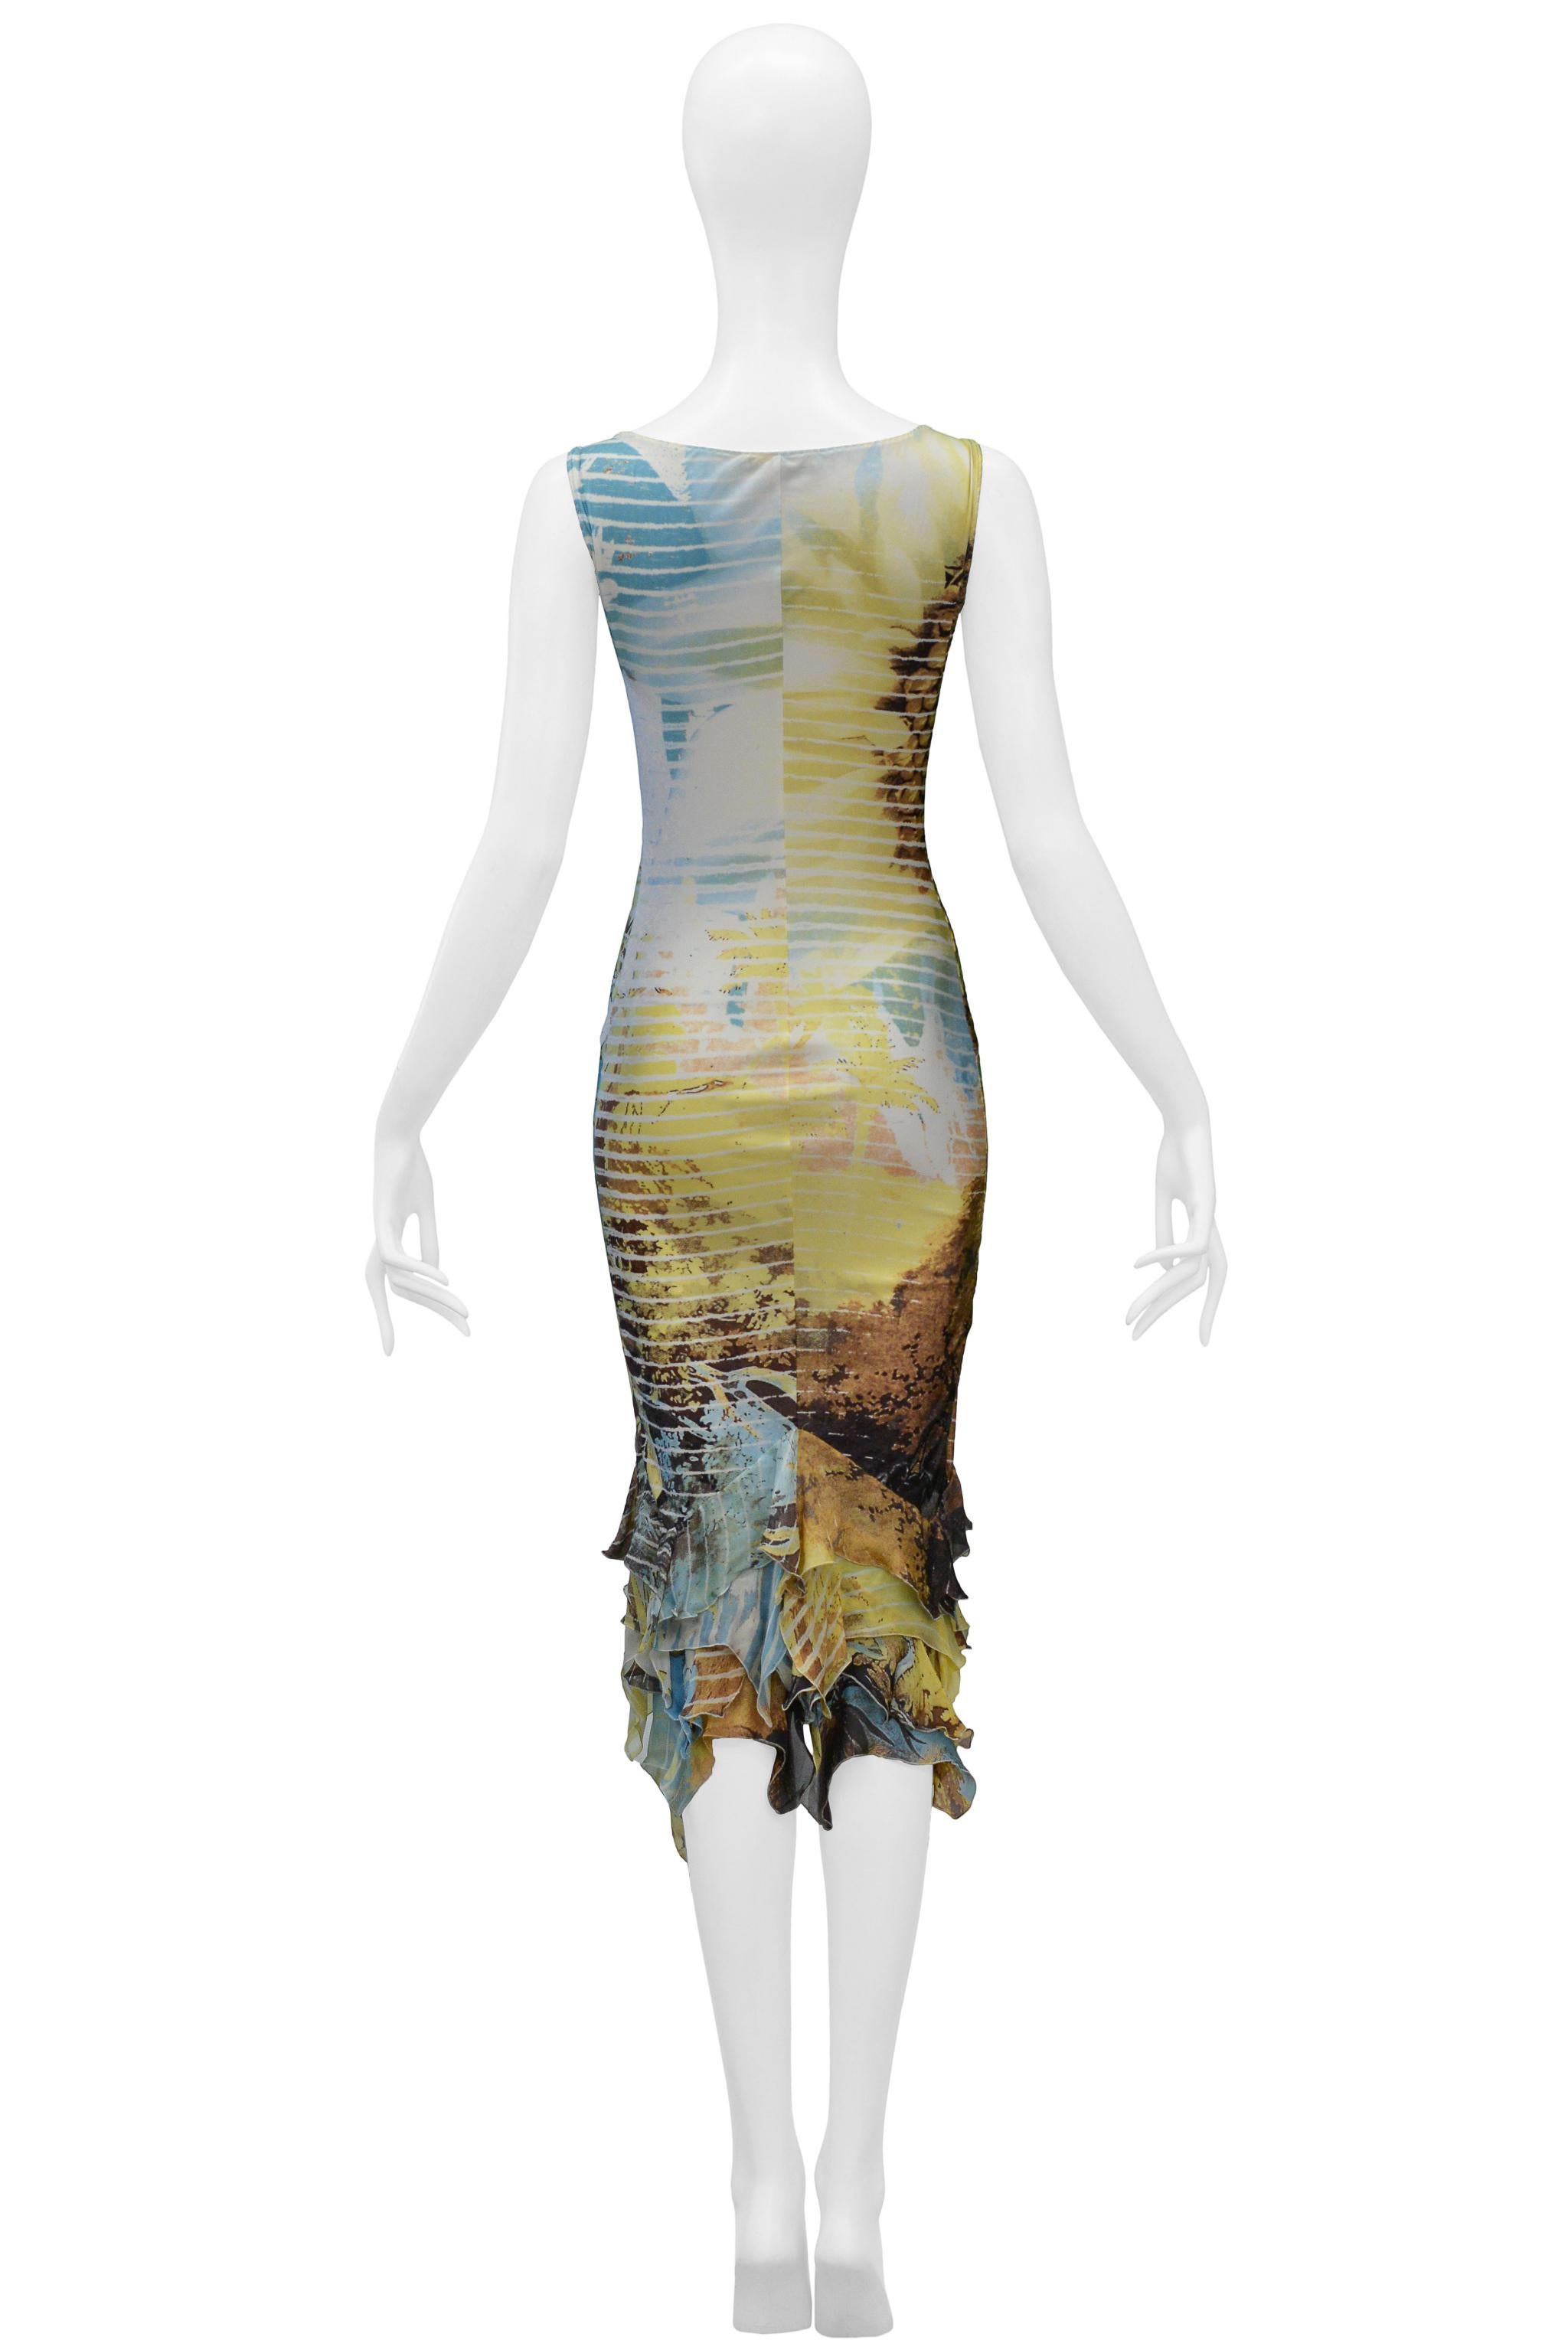 Roberto Cavalli Lion Print Dress With Chiffon Ruffles In Excellent Condition For Sale In Los Angeles, CA